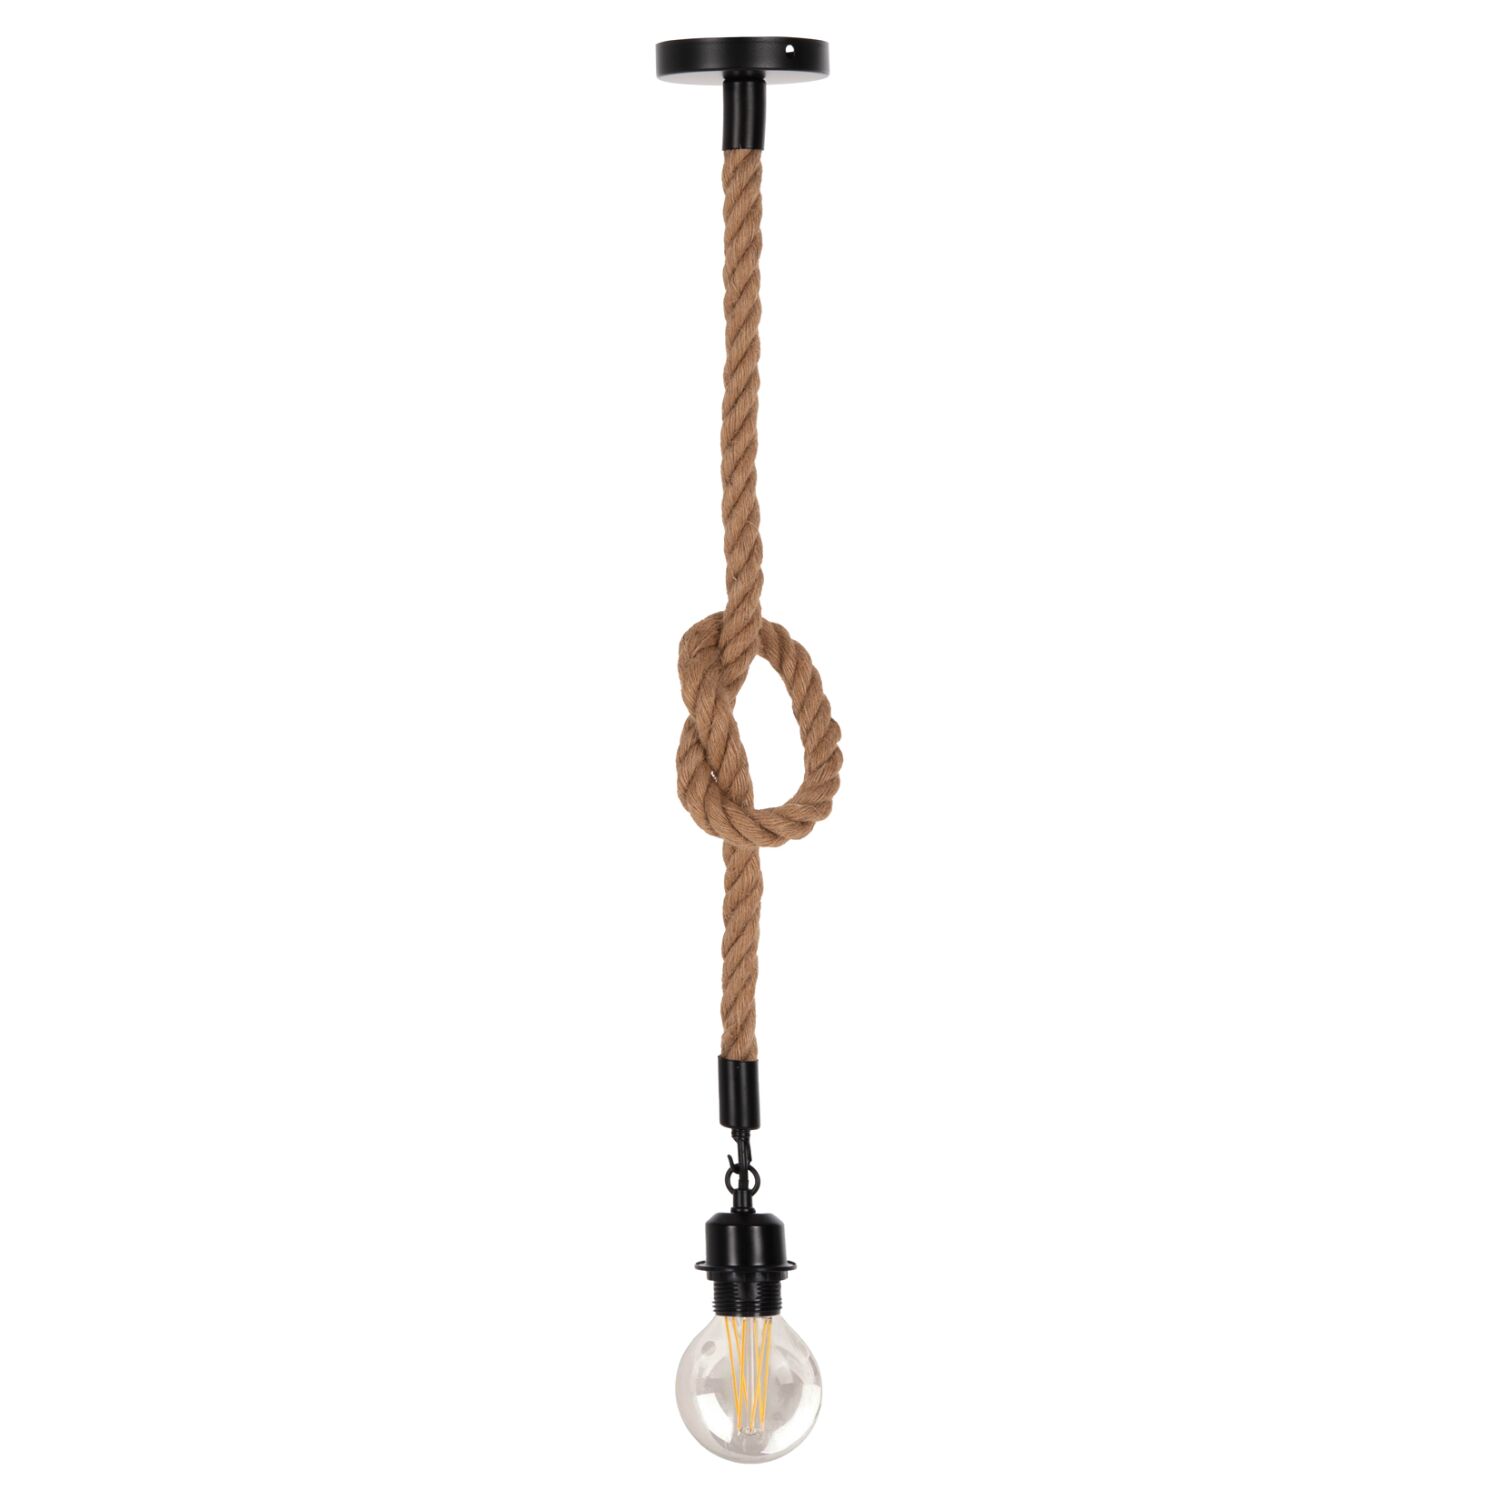 CEILING PENDANT LAMP HM4043 ROPE 1M LONG AND 2cm THICK-E27 SOCKET